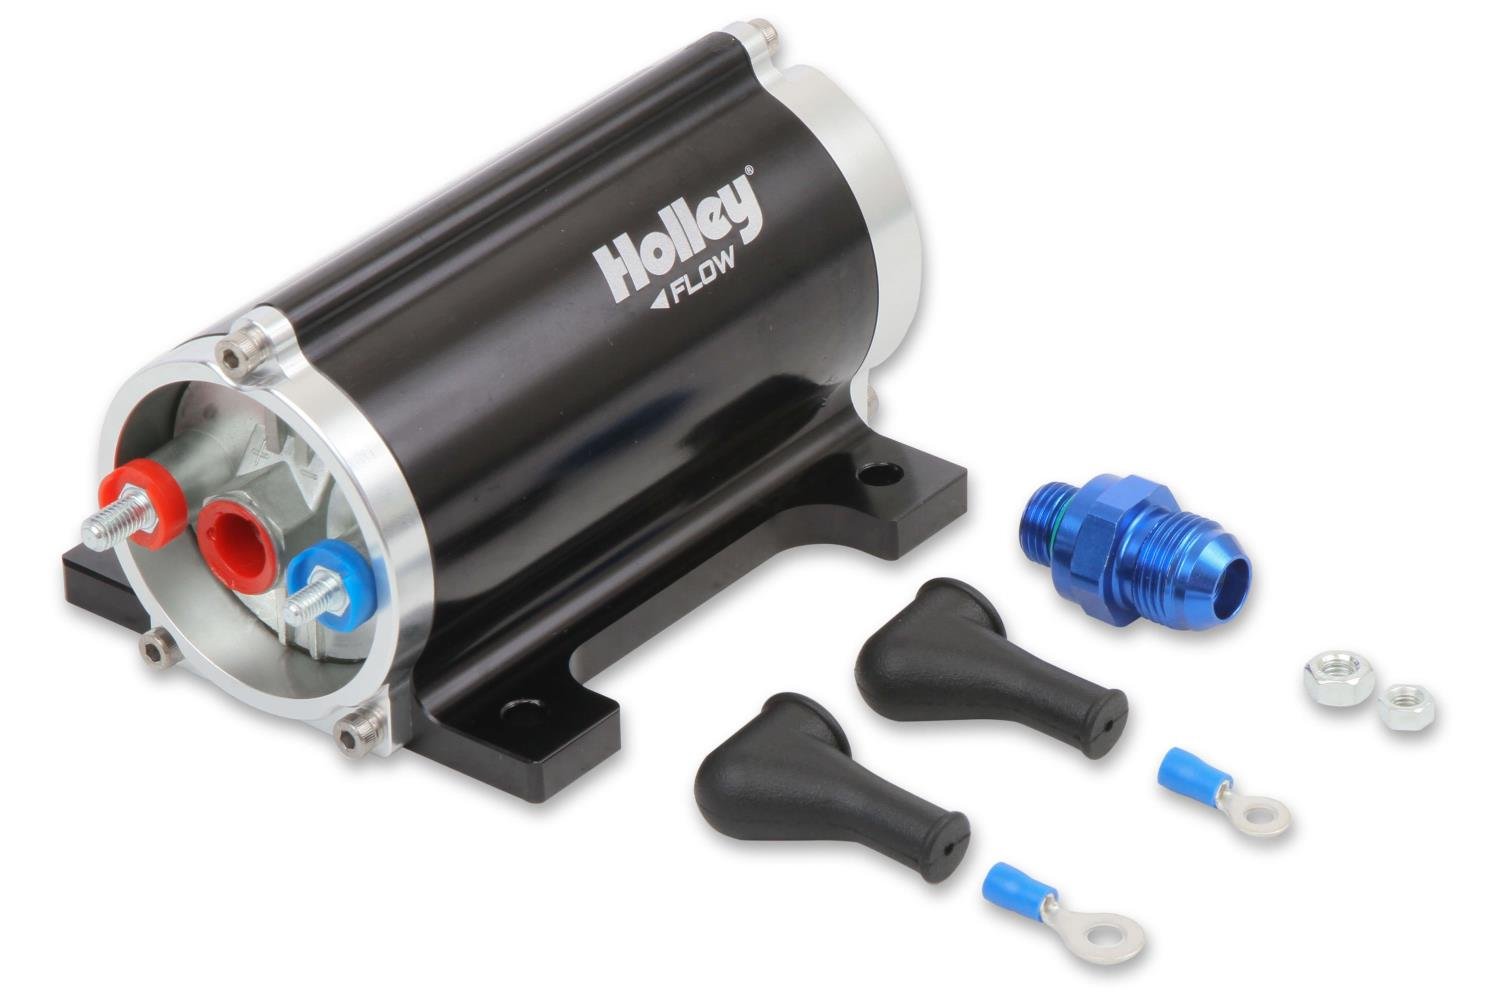 Universal In-Line Electric Fuel Pump 100 GPH @ 8 PSI